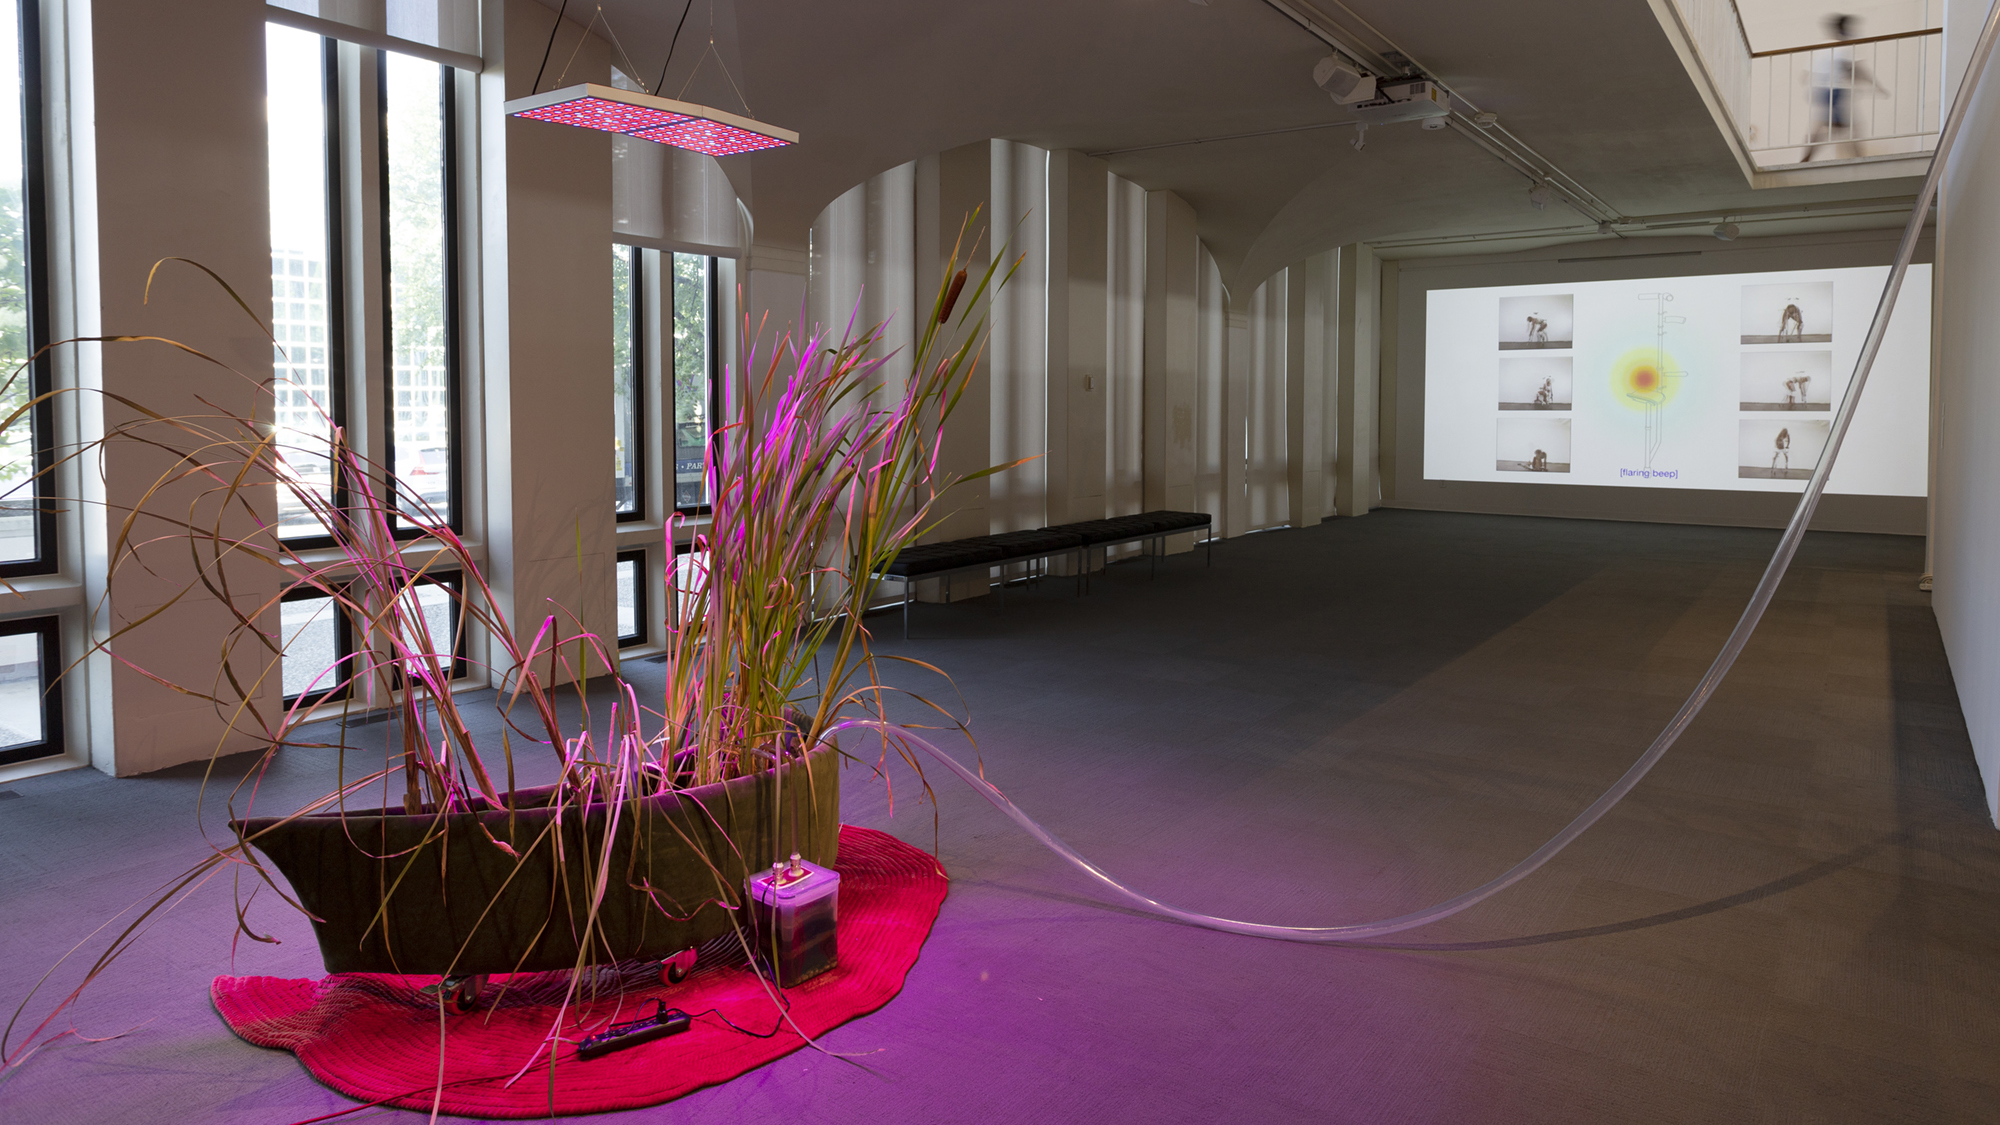 A moonshaped pool on a quilted rug with cattail plants sproating forth as well as clear tubing. The sculpture is illuminated by pink LED light. In the background there is a projection on a wall of a person in six frames and a line drawing of a medical support device.